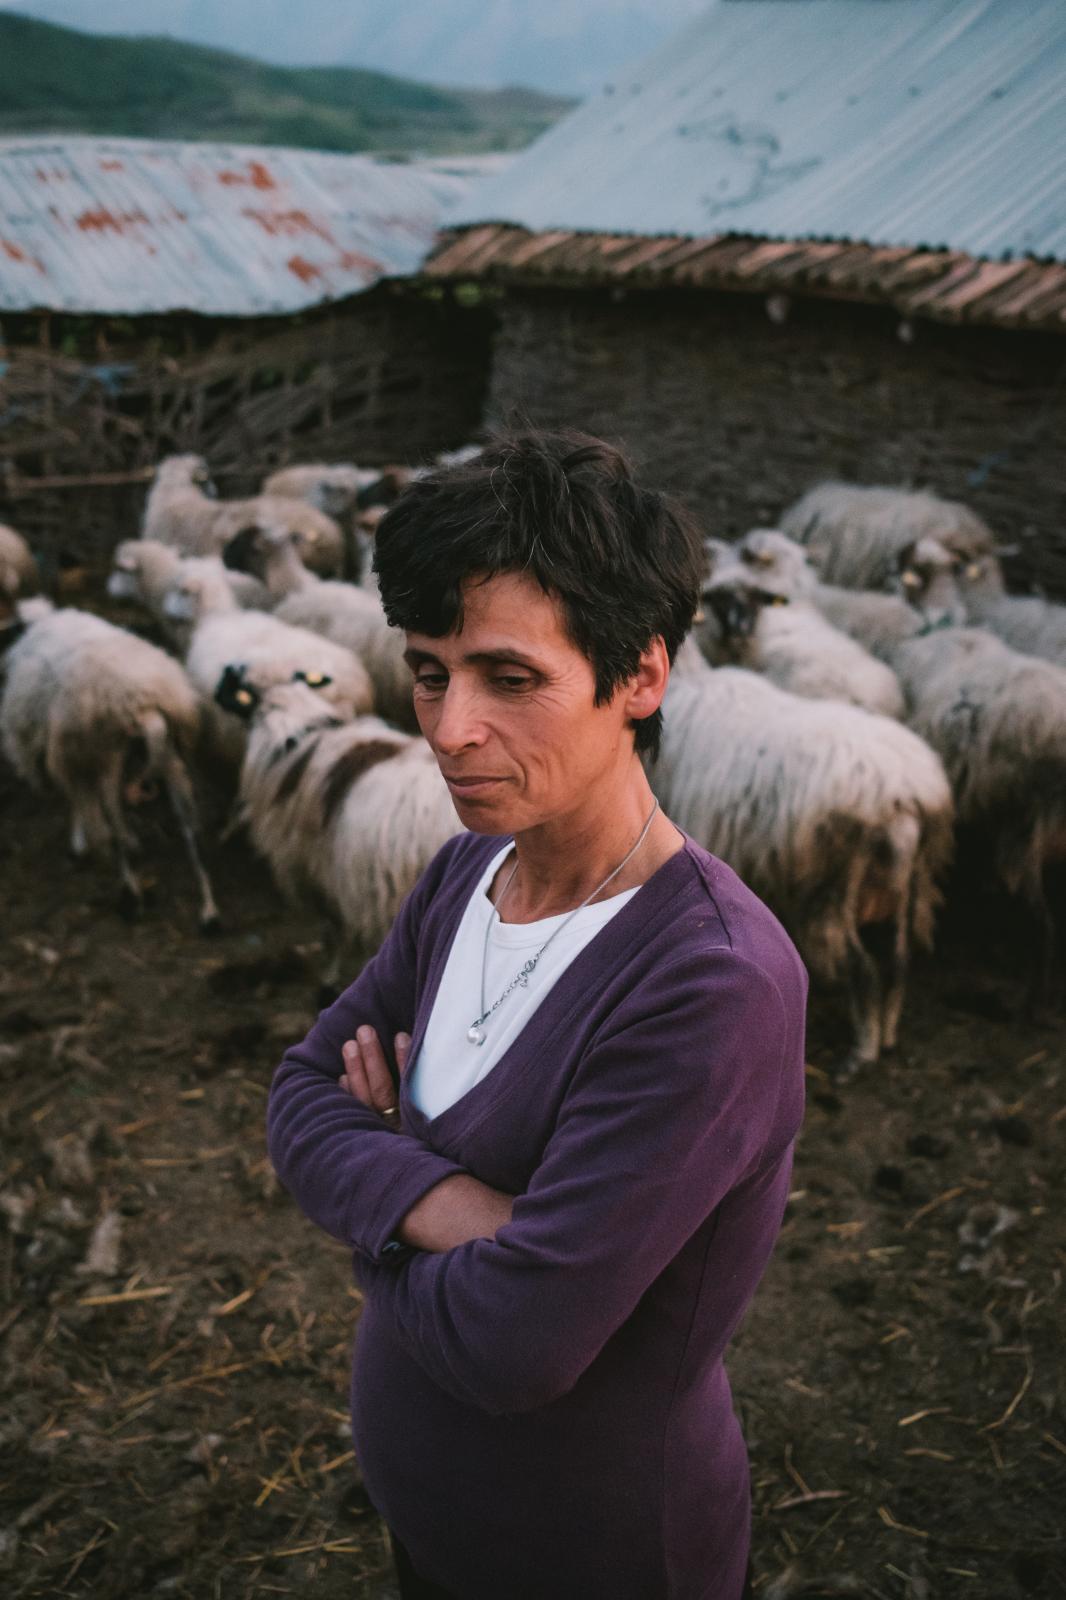 The Vjosa: Portraits of Life on Europe's Last Wild River - Ylli and her family raise sheep and grow crops on their...